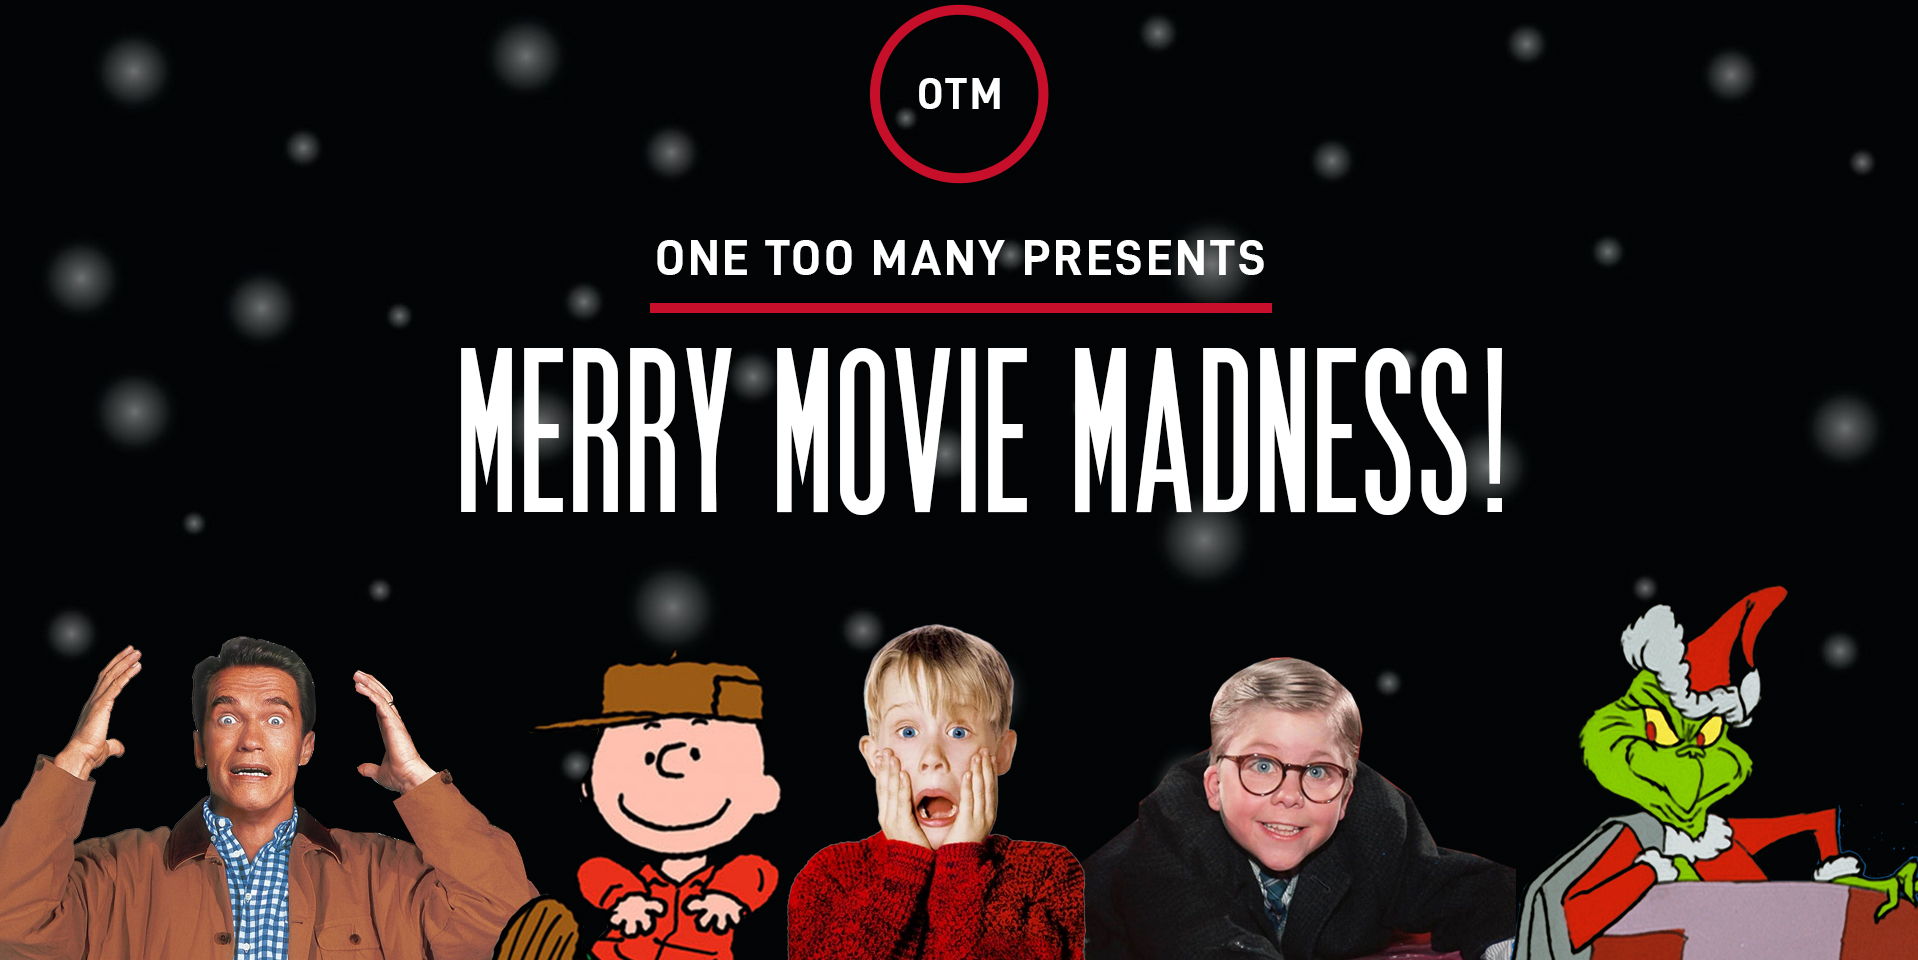 One Too Many Presents: Merry Movie Madness! promotional image